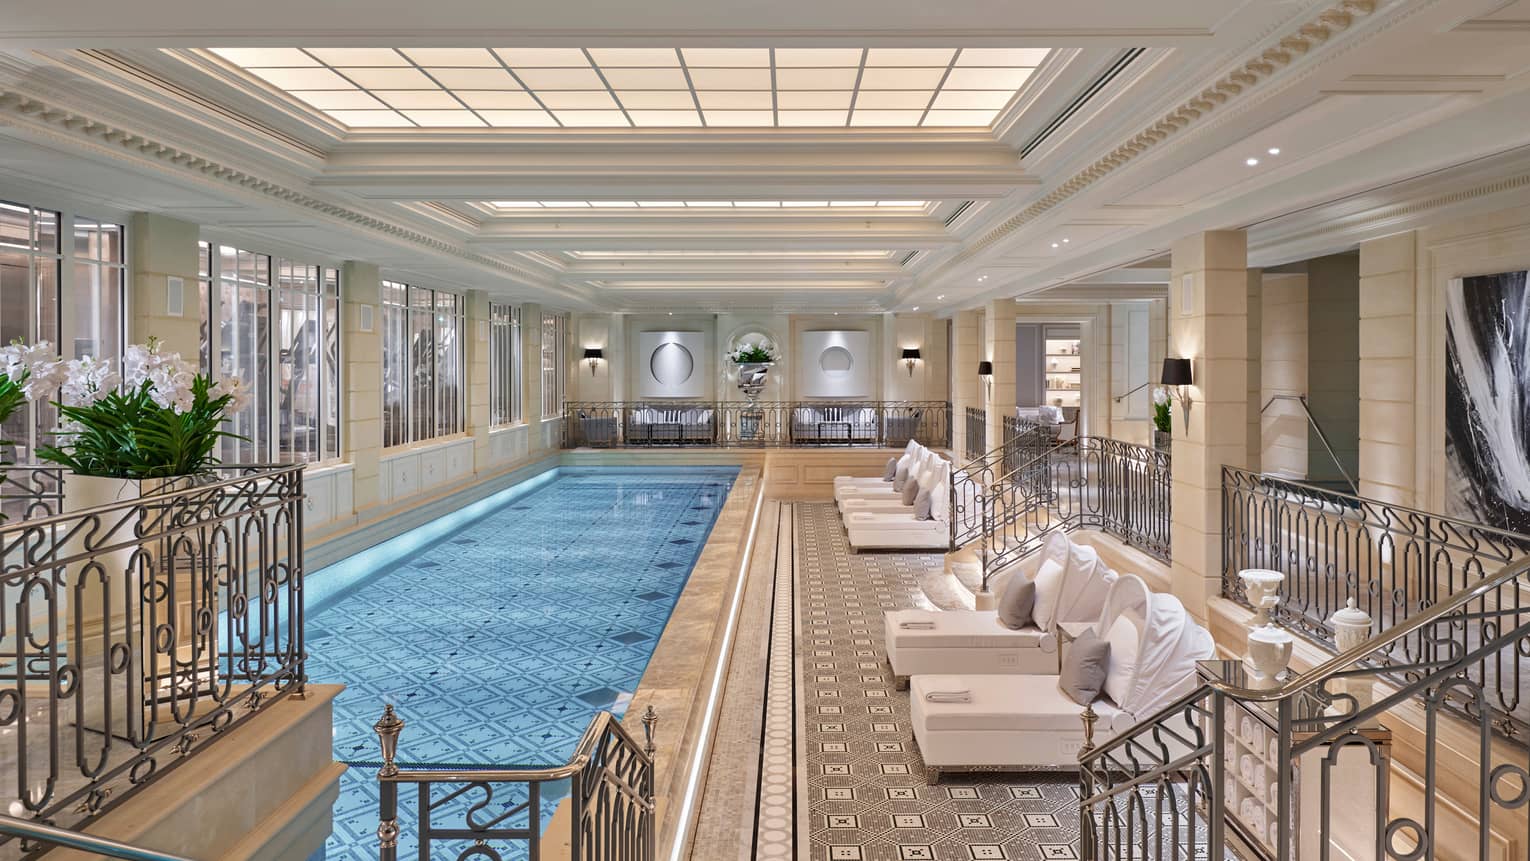 Long, elegant indoor swimming pool lined with plush white patio lounge chairs